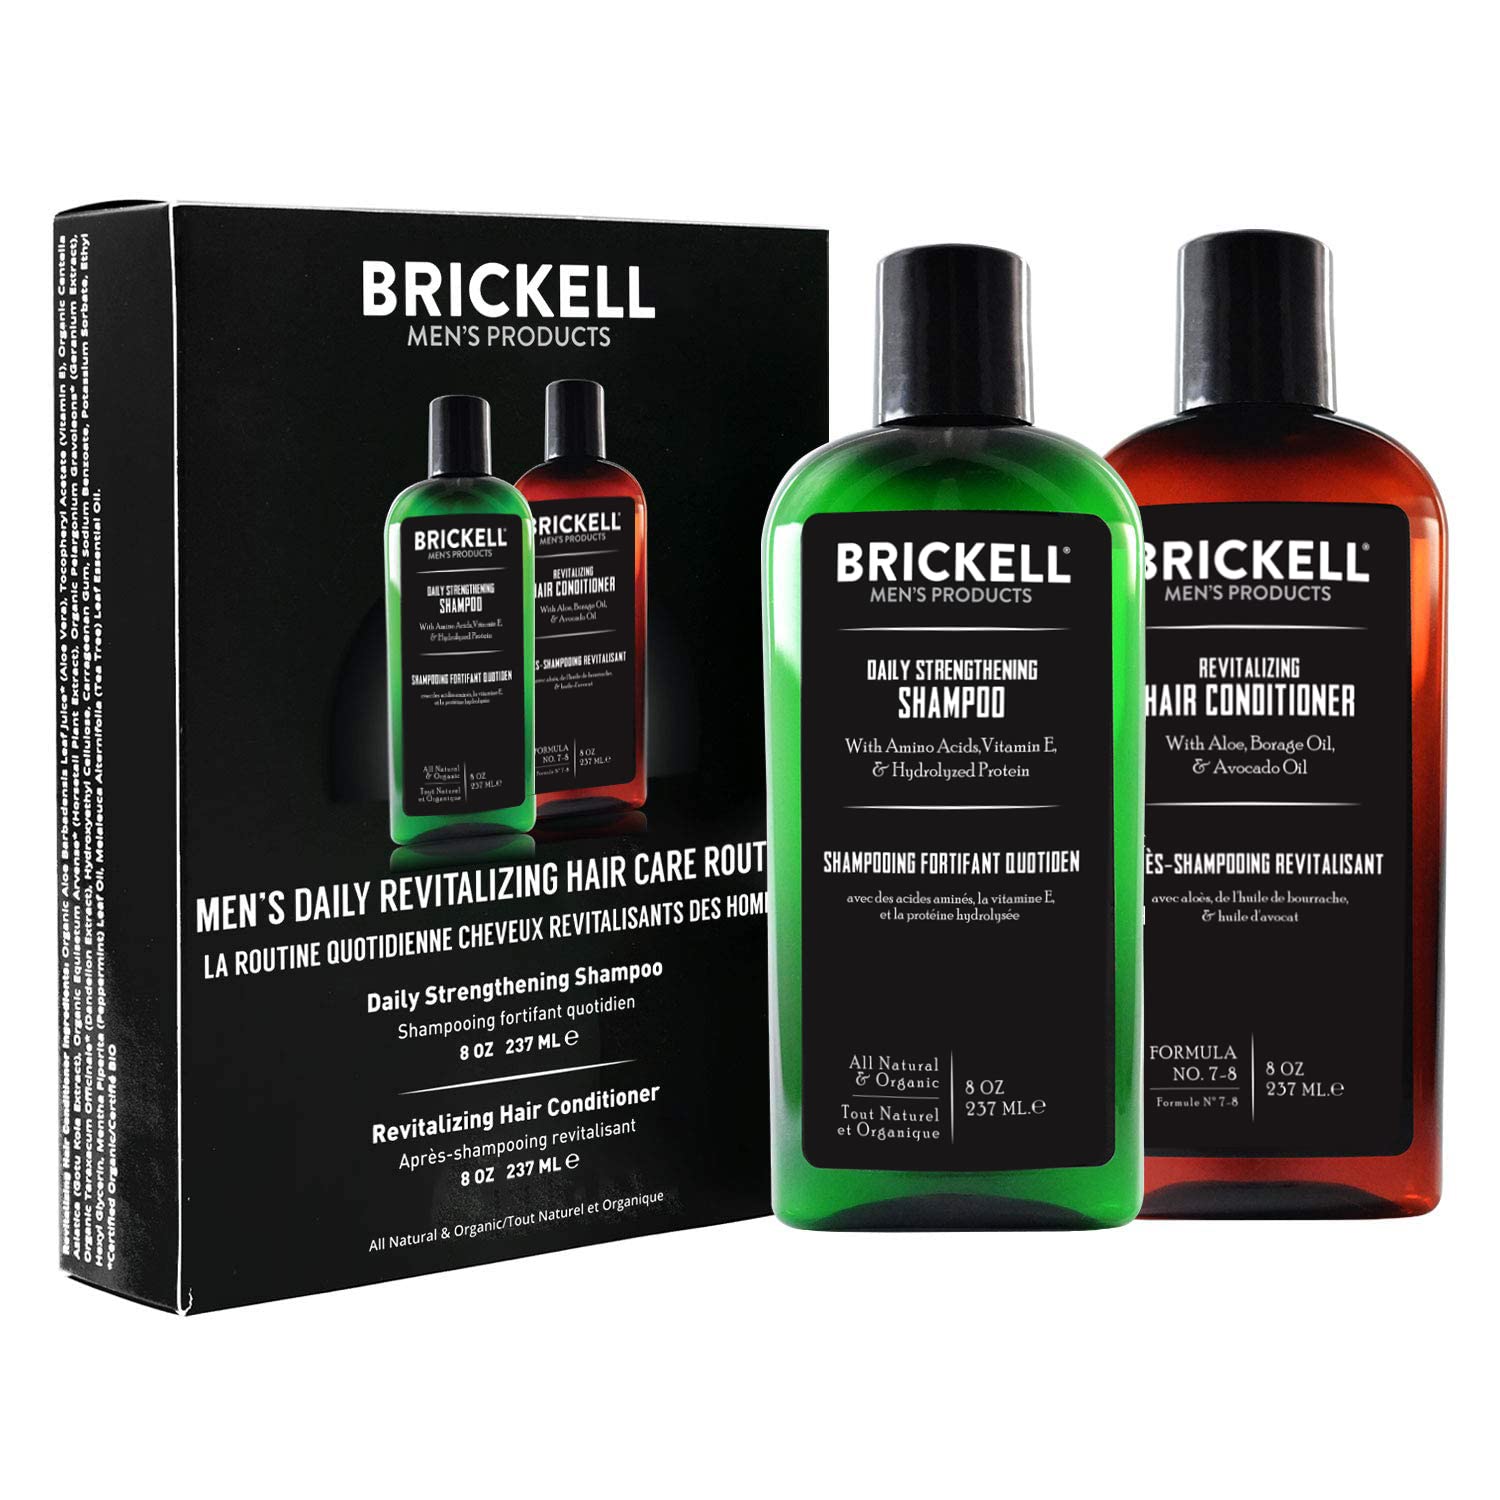 Mua Brickell Men's Daily Revitalizing Hair Care Routine, Shampoo and  Conditioner Set For Men, Mint and Tea Tree Oil Shampoo, Strength and Volume  Enhancing Conditioner, Natural and Organic trên Amazon Nhật chính